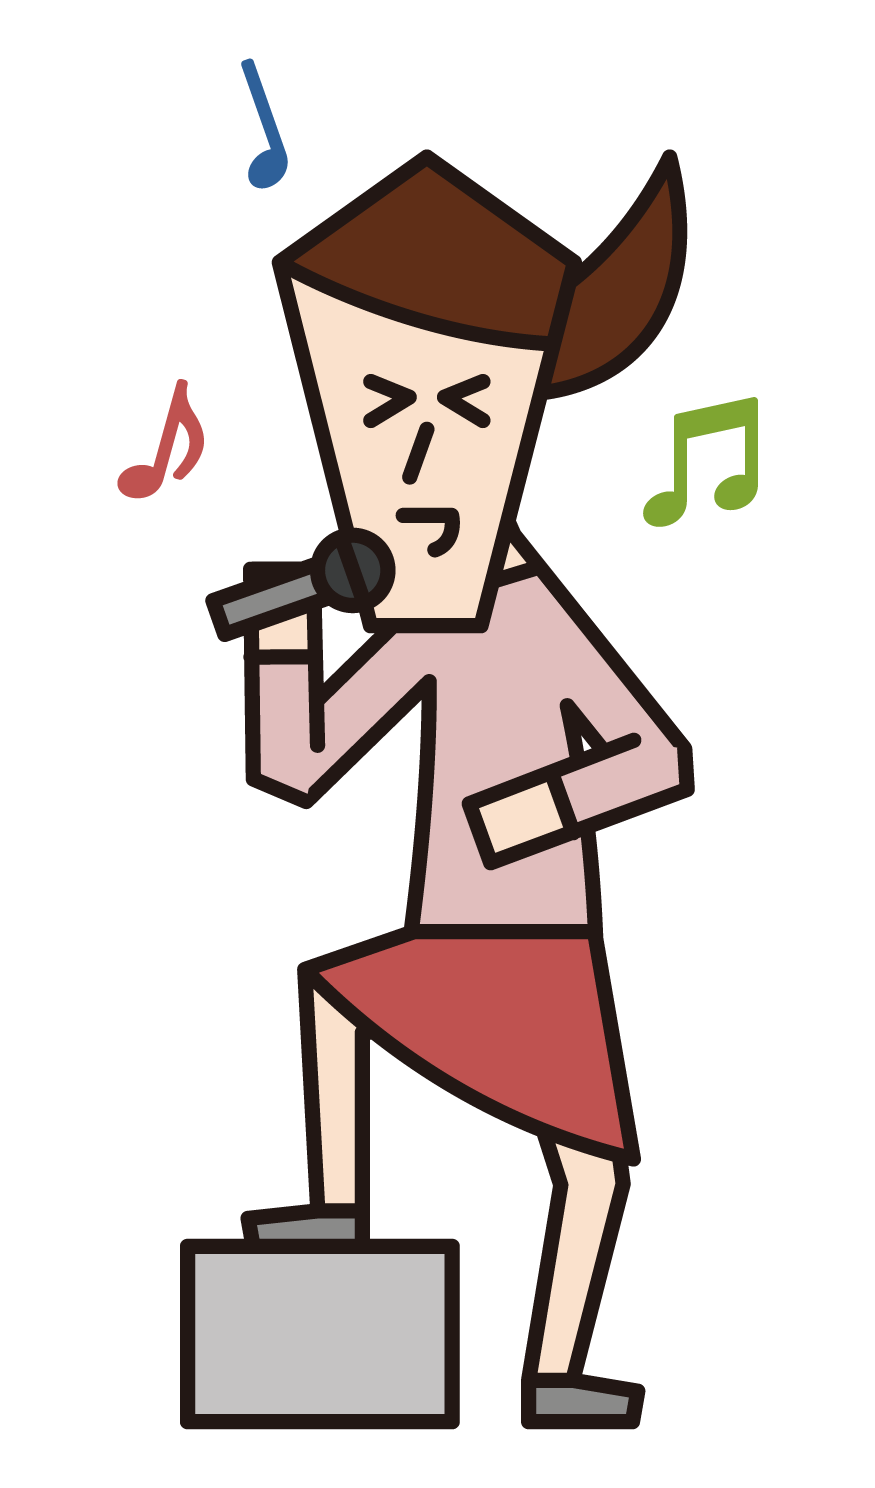 Illustration of a man singing a song